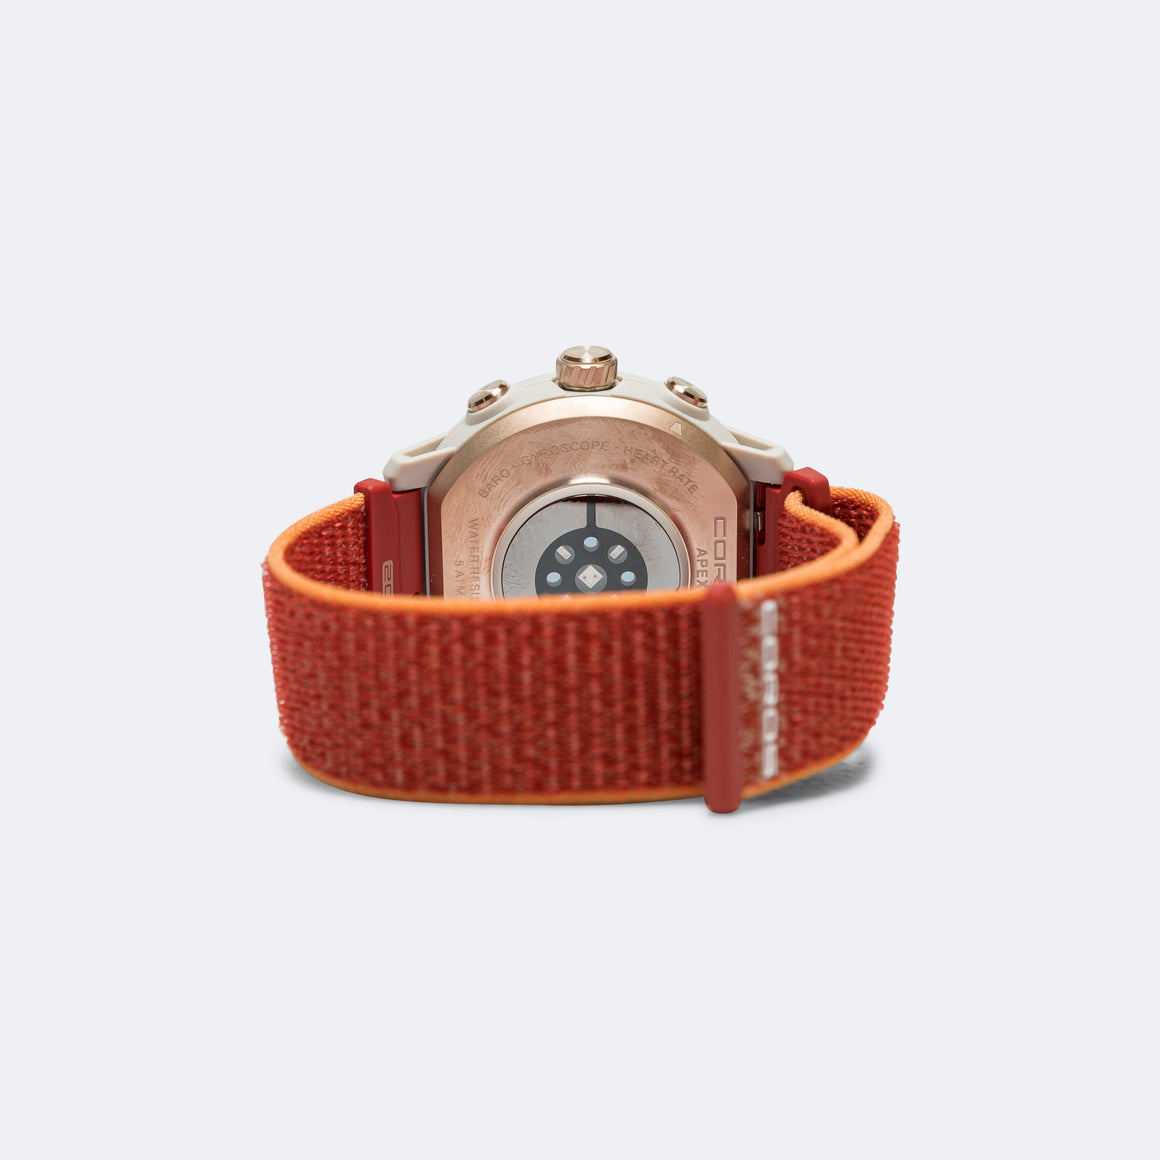 APEX 2 GPS Outdoor Watch - Coral